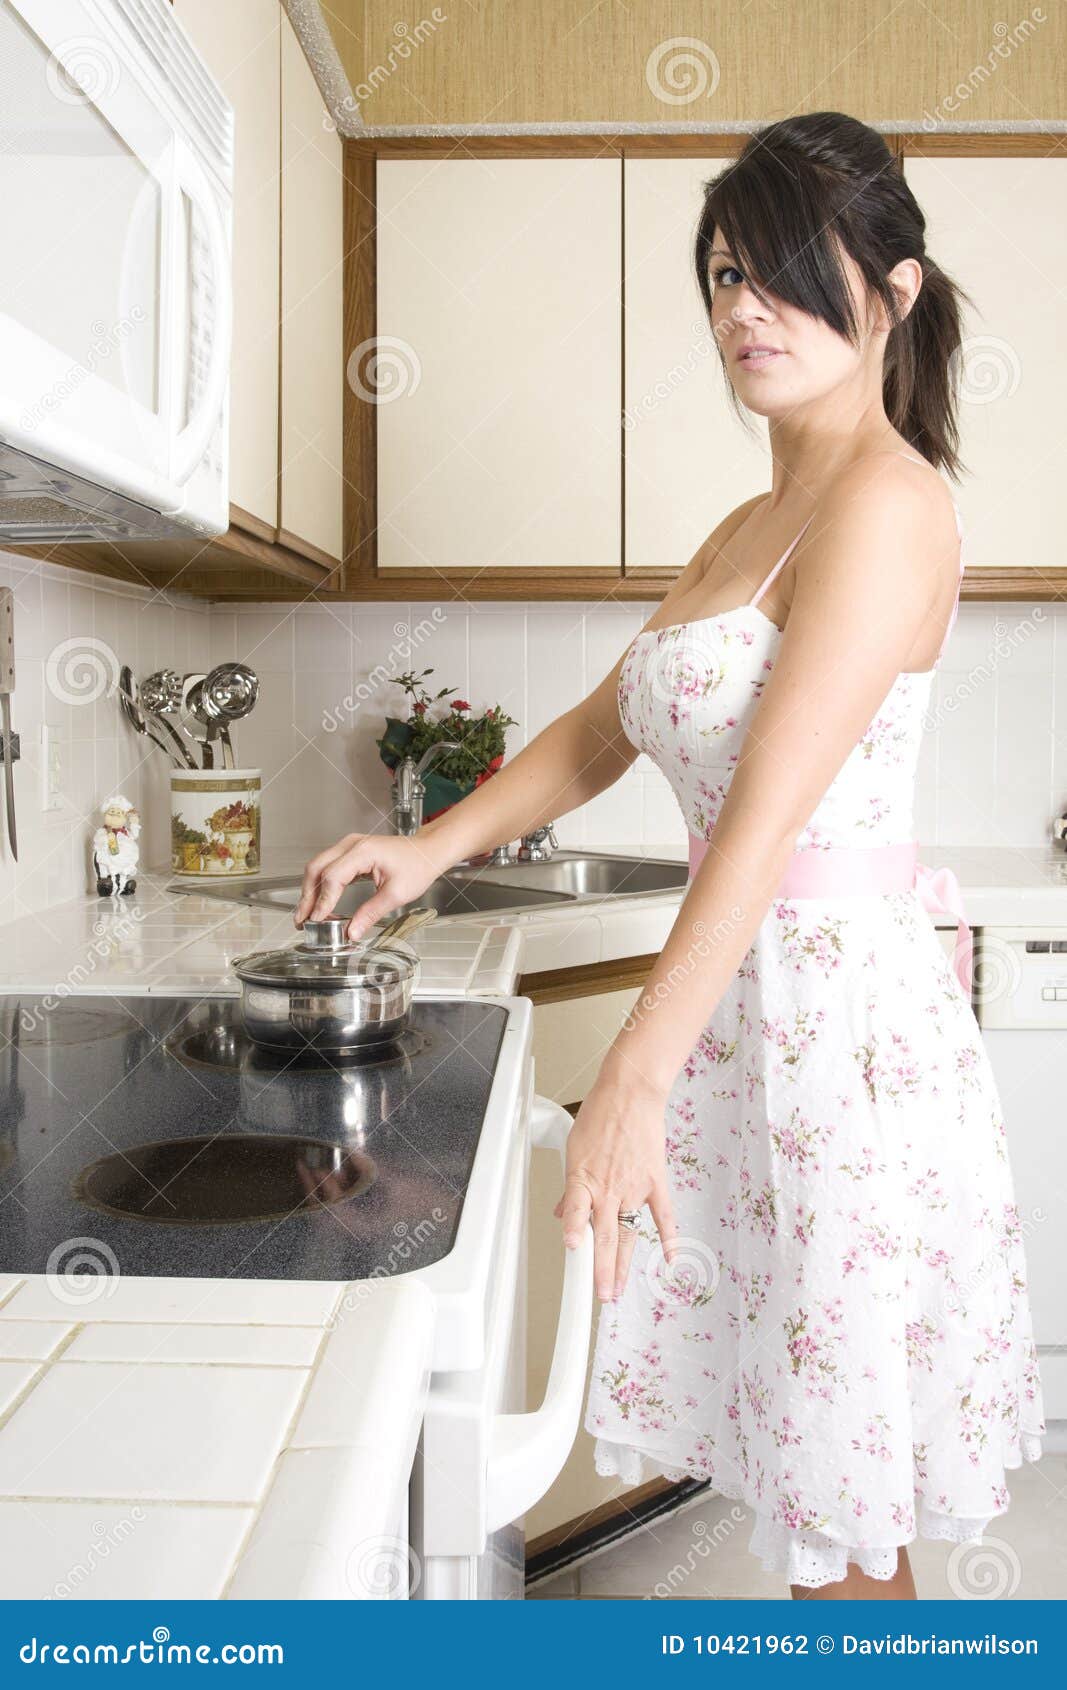 Housewife In The Kitchen Stock Photography Image